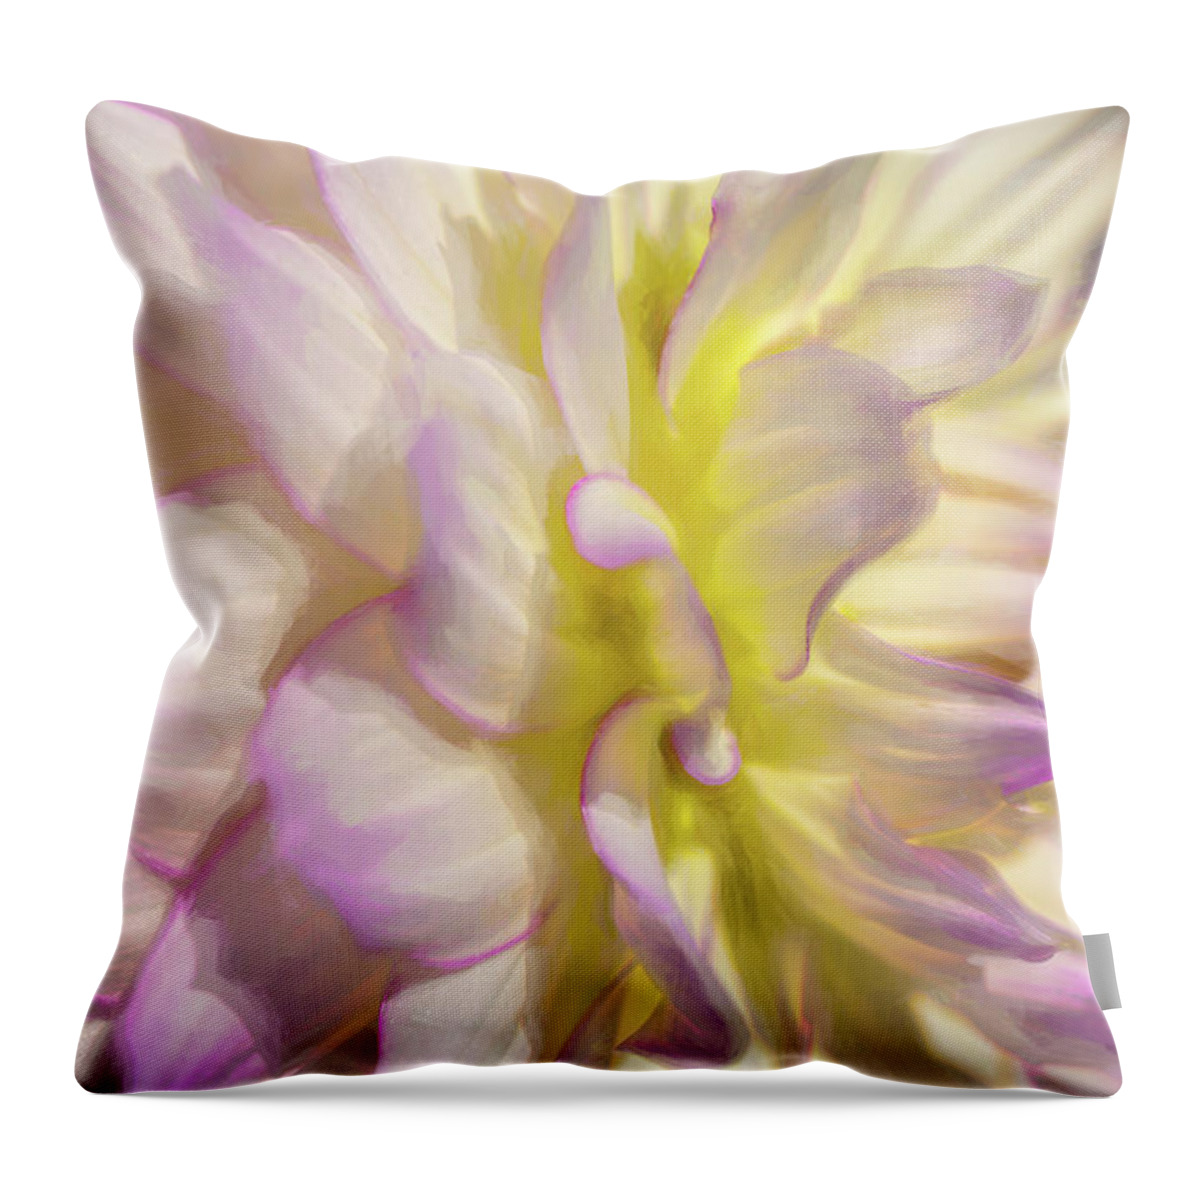 Dahlia Throw Pillow featuring the photograph Dahlia Study 5 Painterly by Scott Campbell